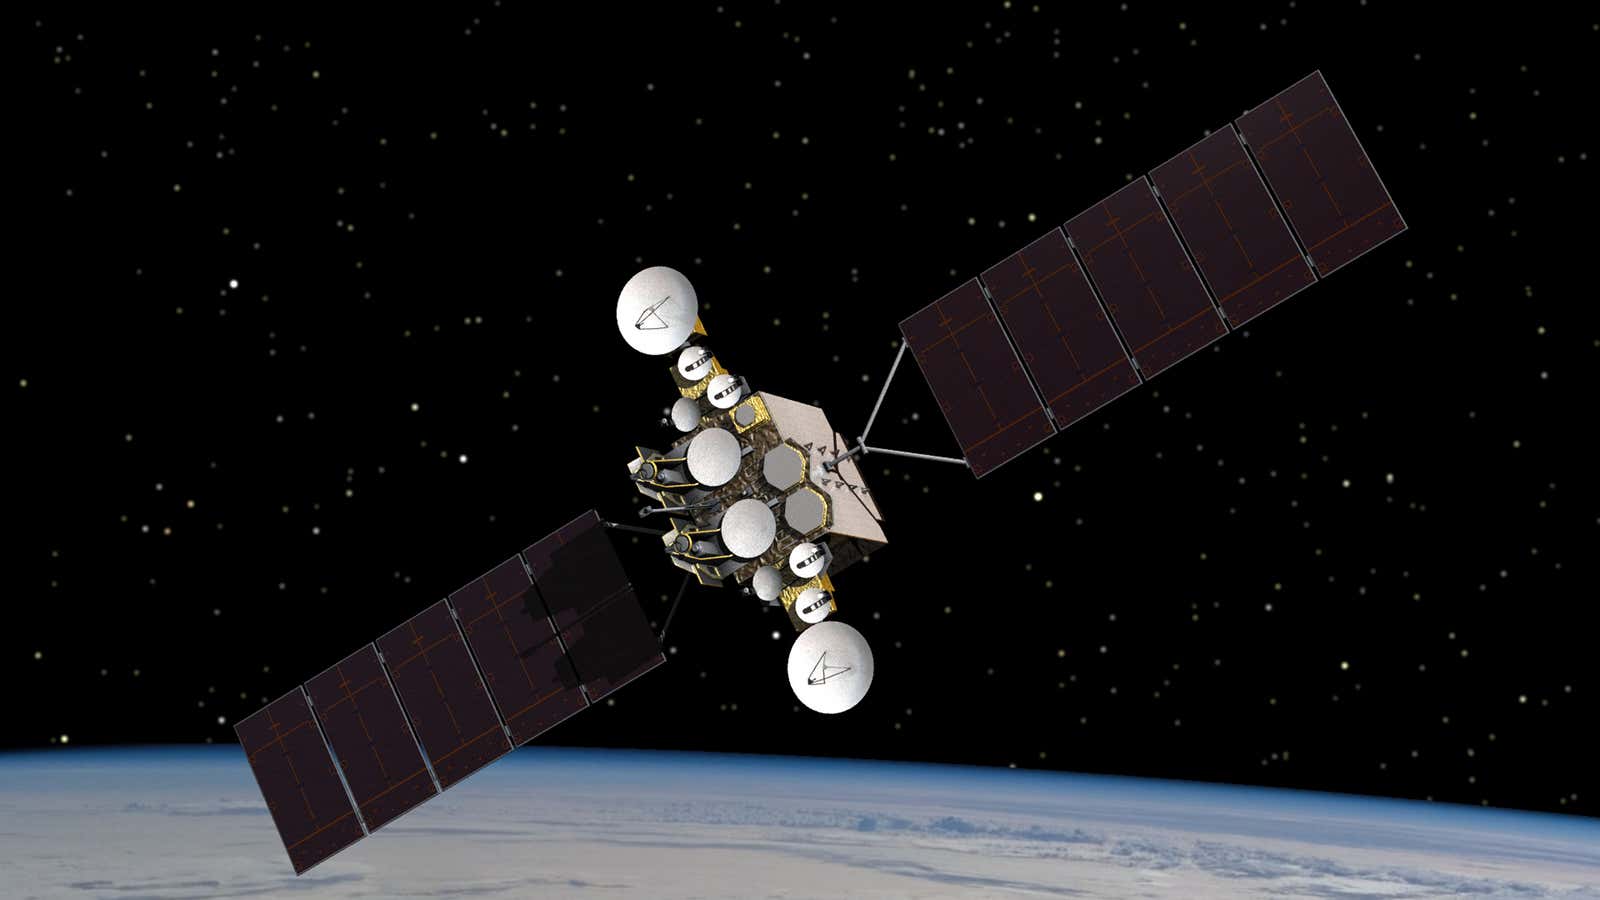 You could soon be sharing your Wi-Fi spectrum with a communications satellite like this one.